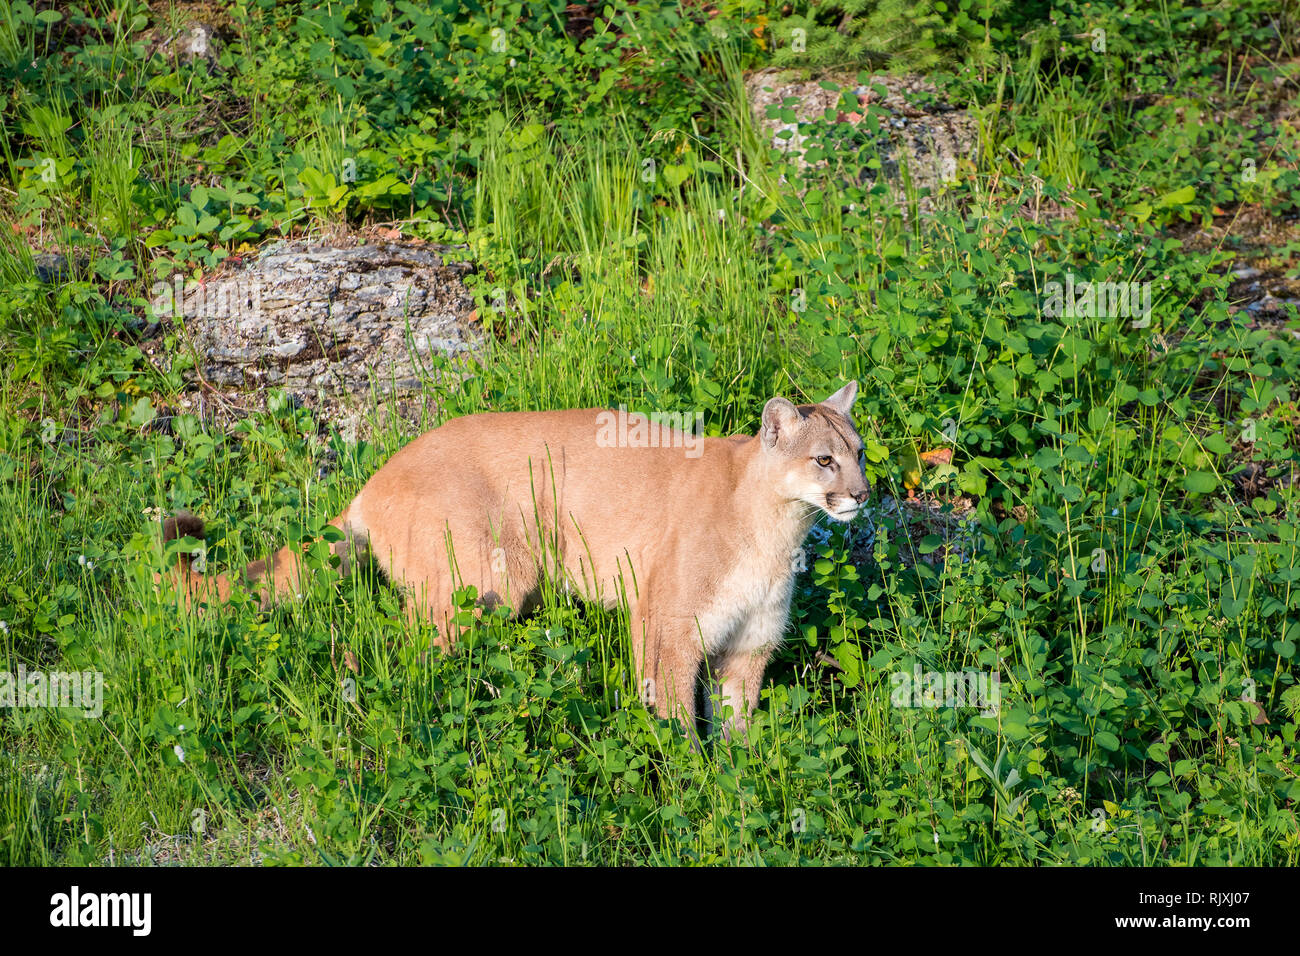 Mountain Lion walking through the Bright Green Grasses in the Spring Stock Photo